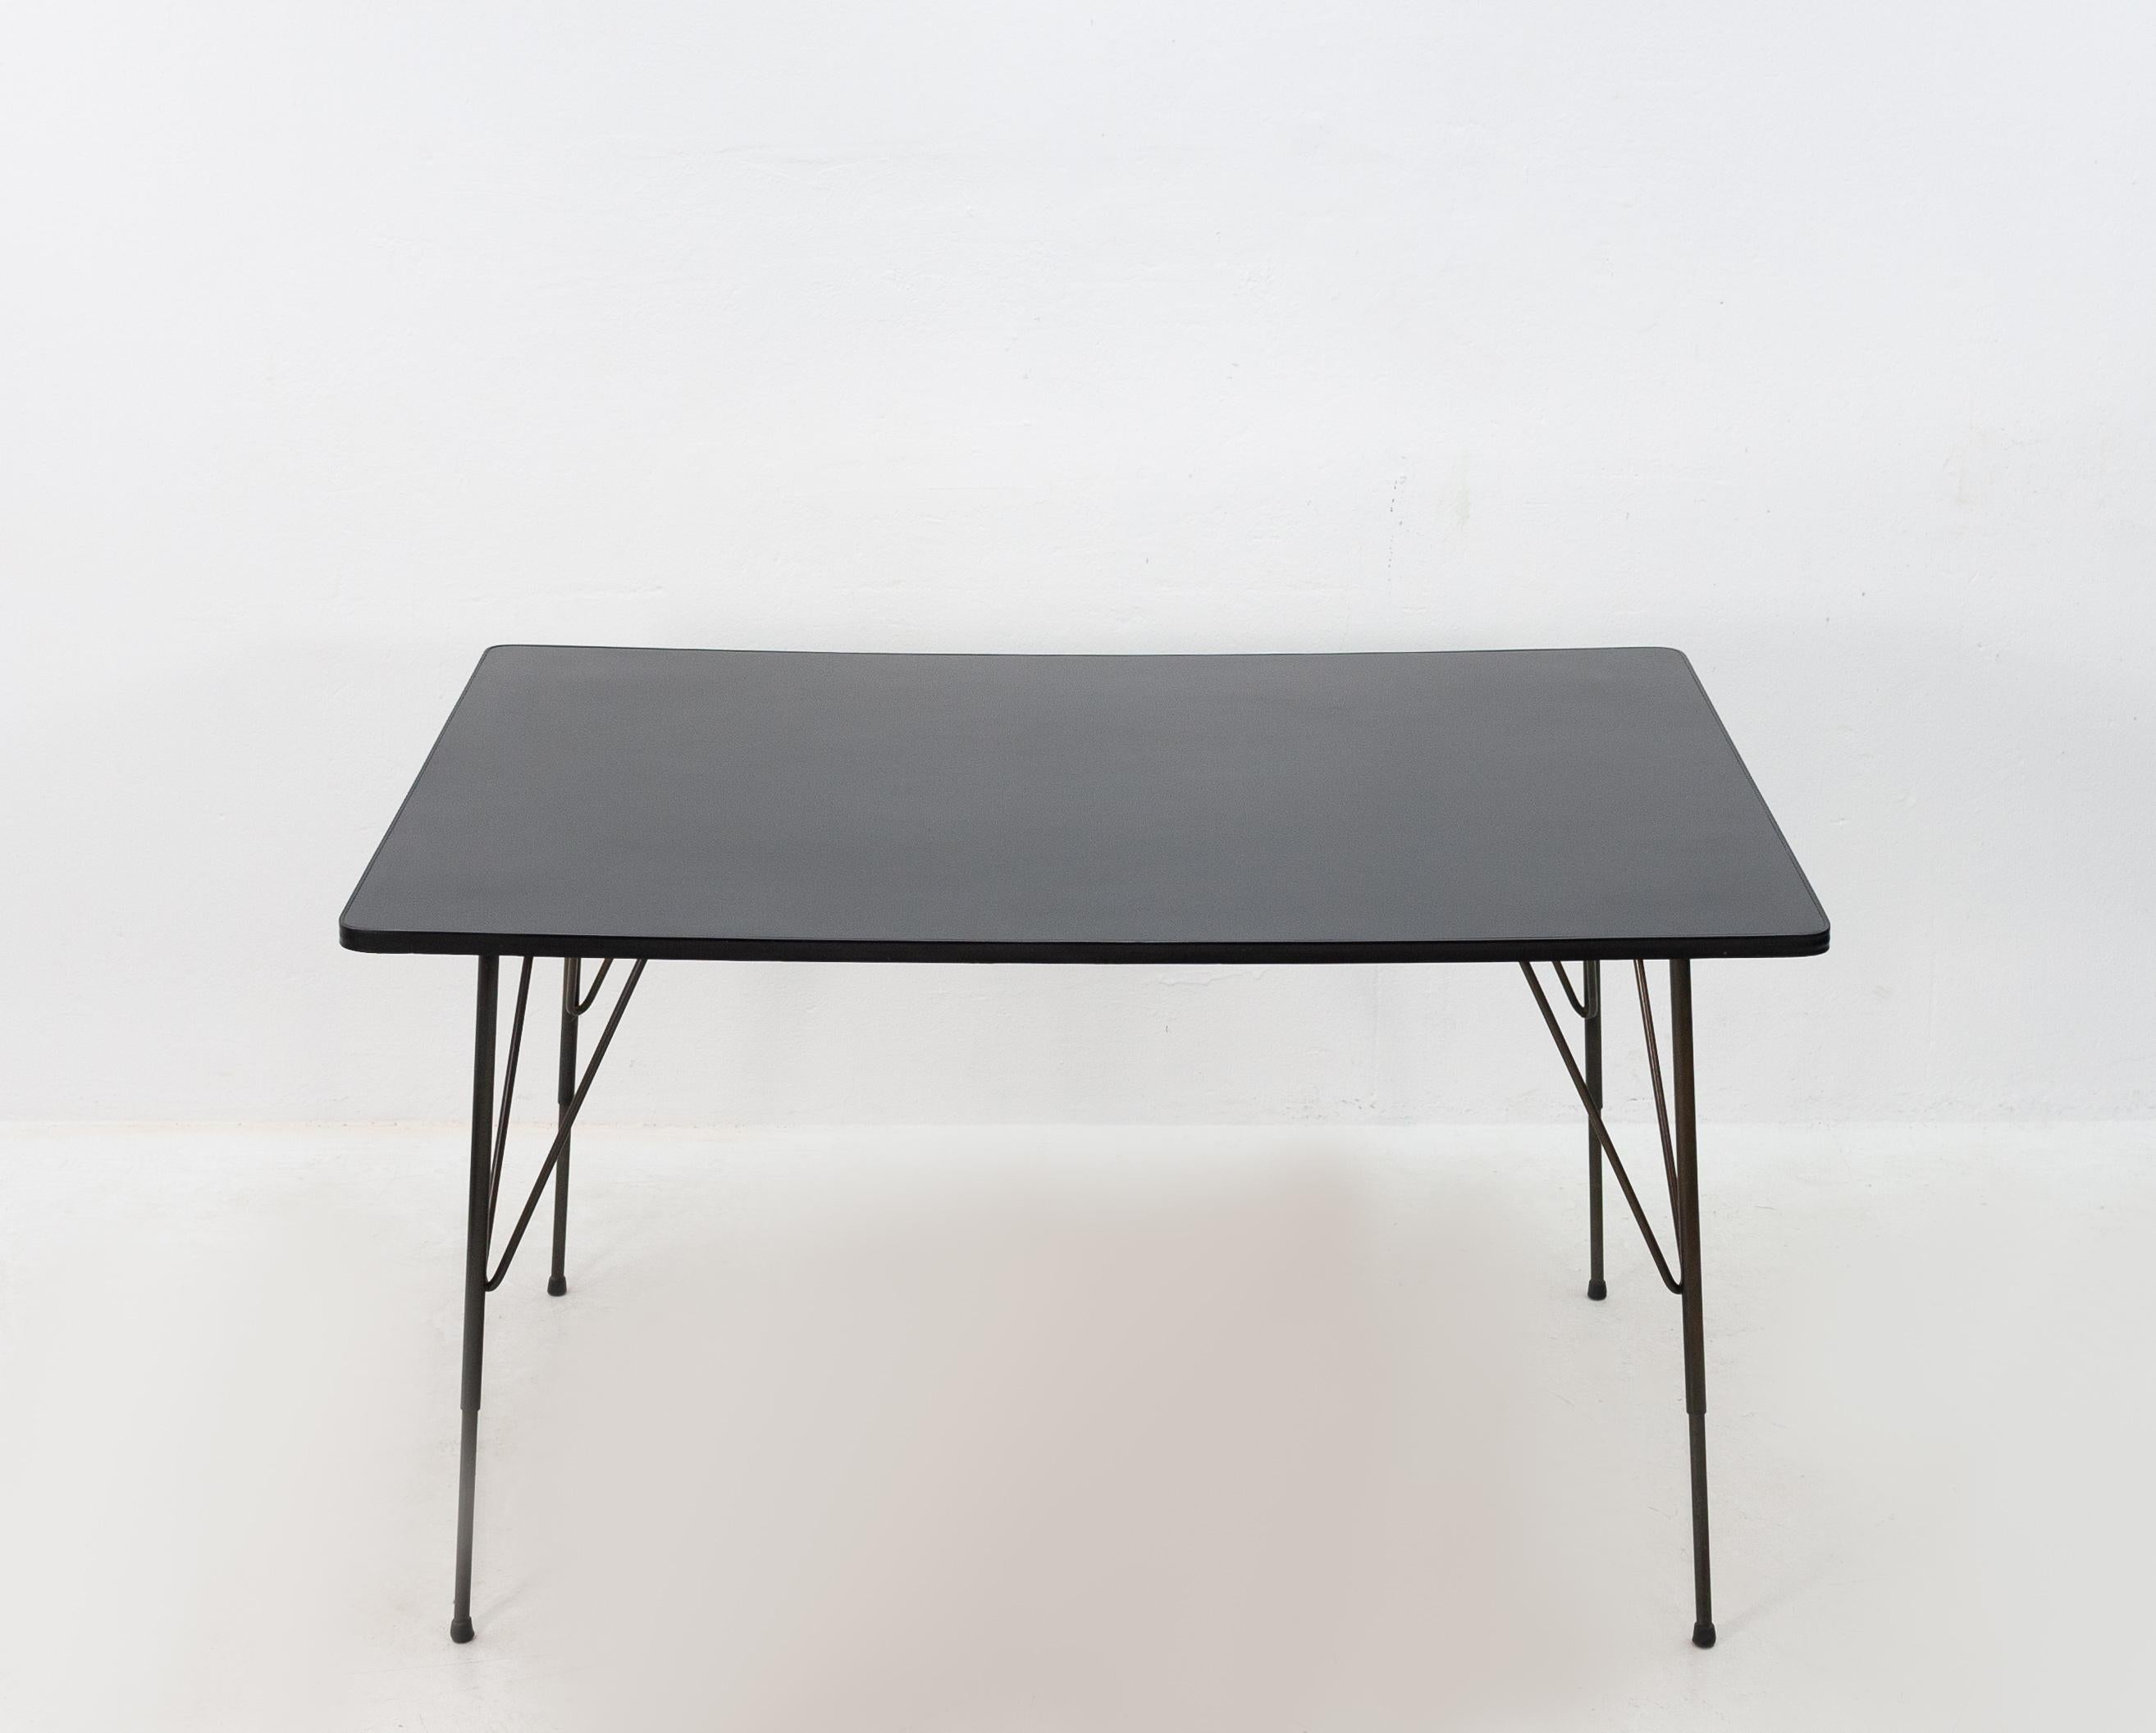 This table was designed by Rudolf Wolf for Elsrijk steel furniture Rudolf Wolf is a Dutch architect and designer. 1950s Holland. Very nice simple design.

This table is suitable for use as a desk or dining table and it is in very good condition.